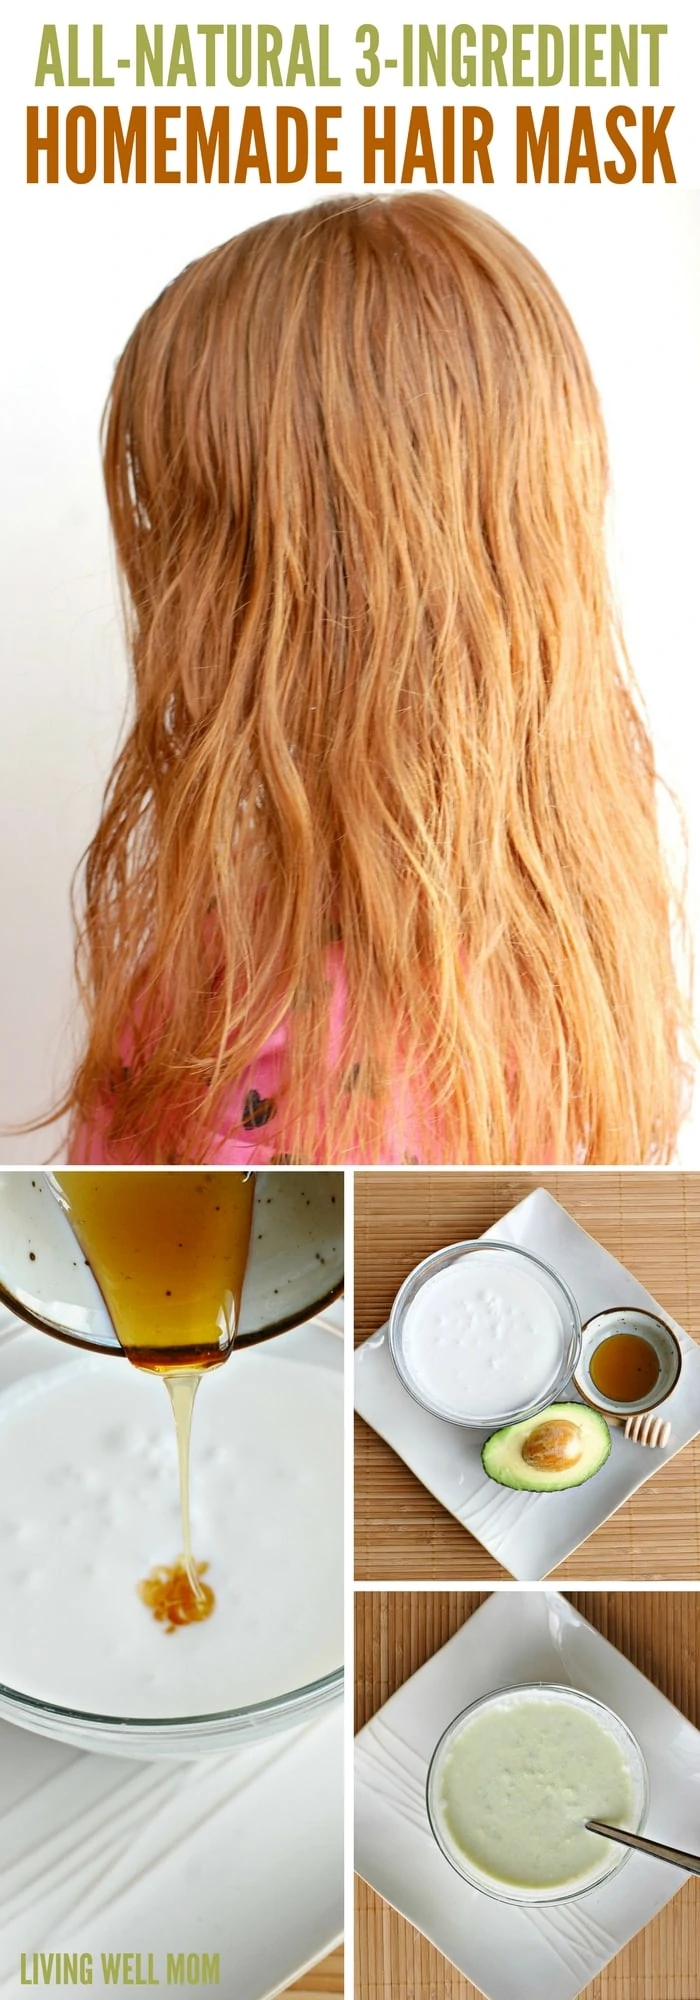 Deep condition and restore dull hair with this simple 3-ingredient, all-natural homemade hair mask. It’s gentle and easy enough to use on kids too!